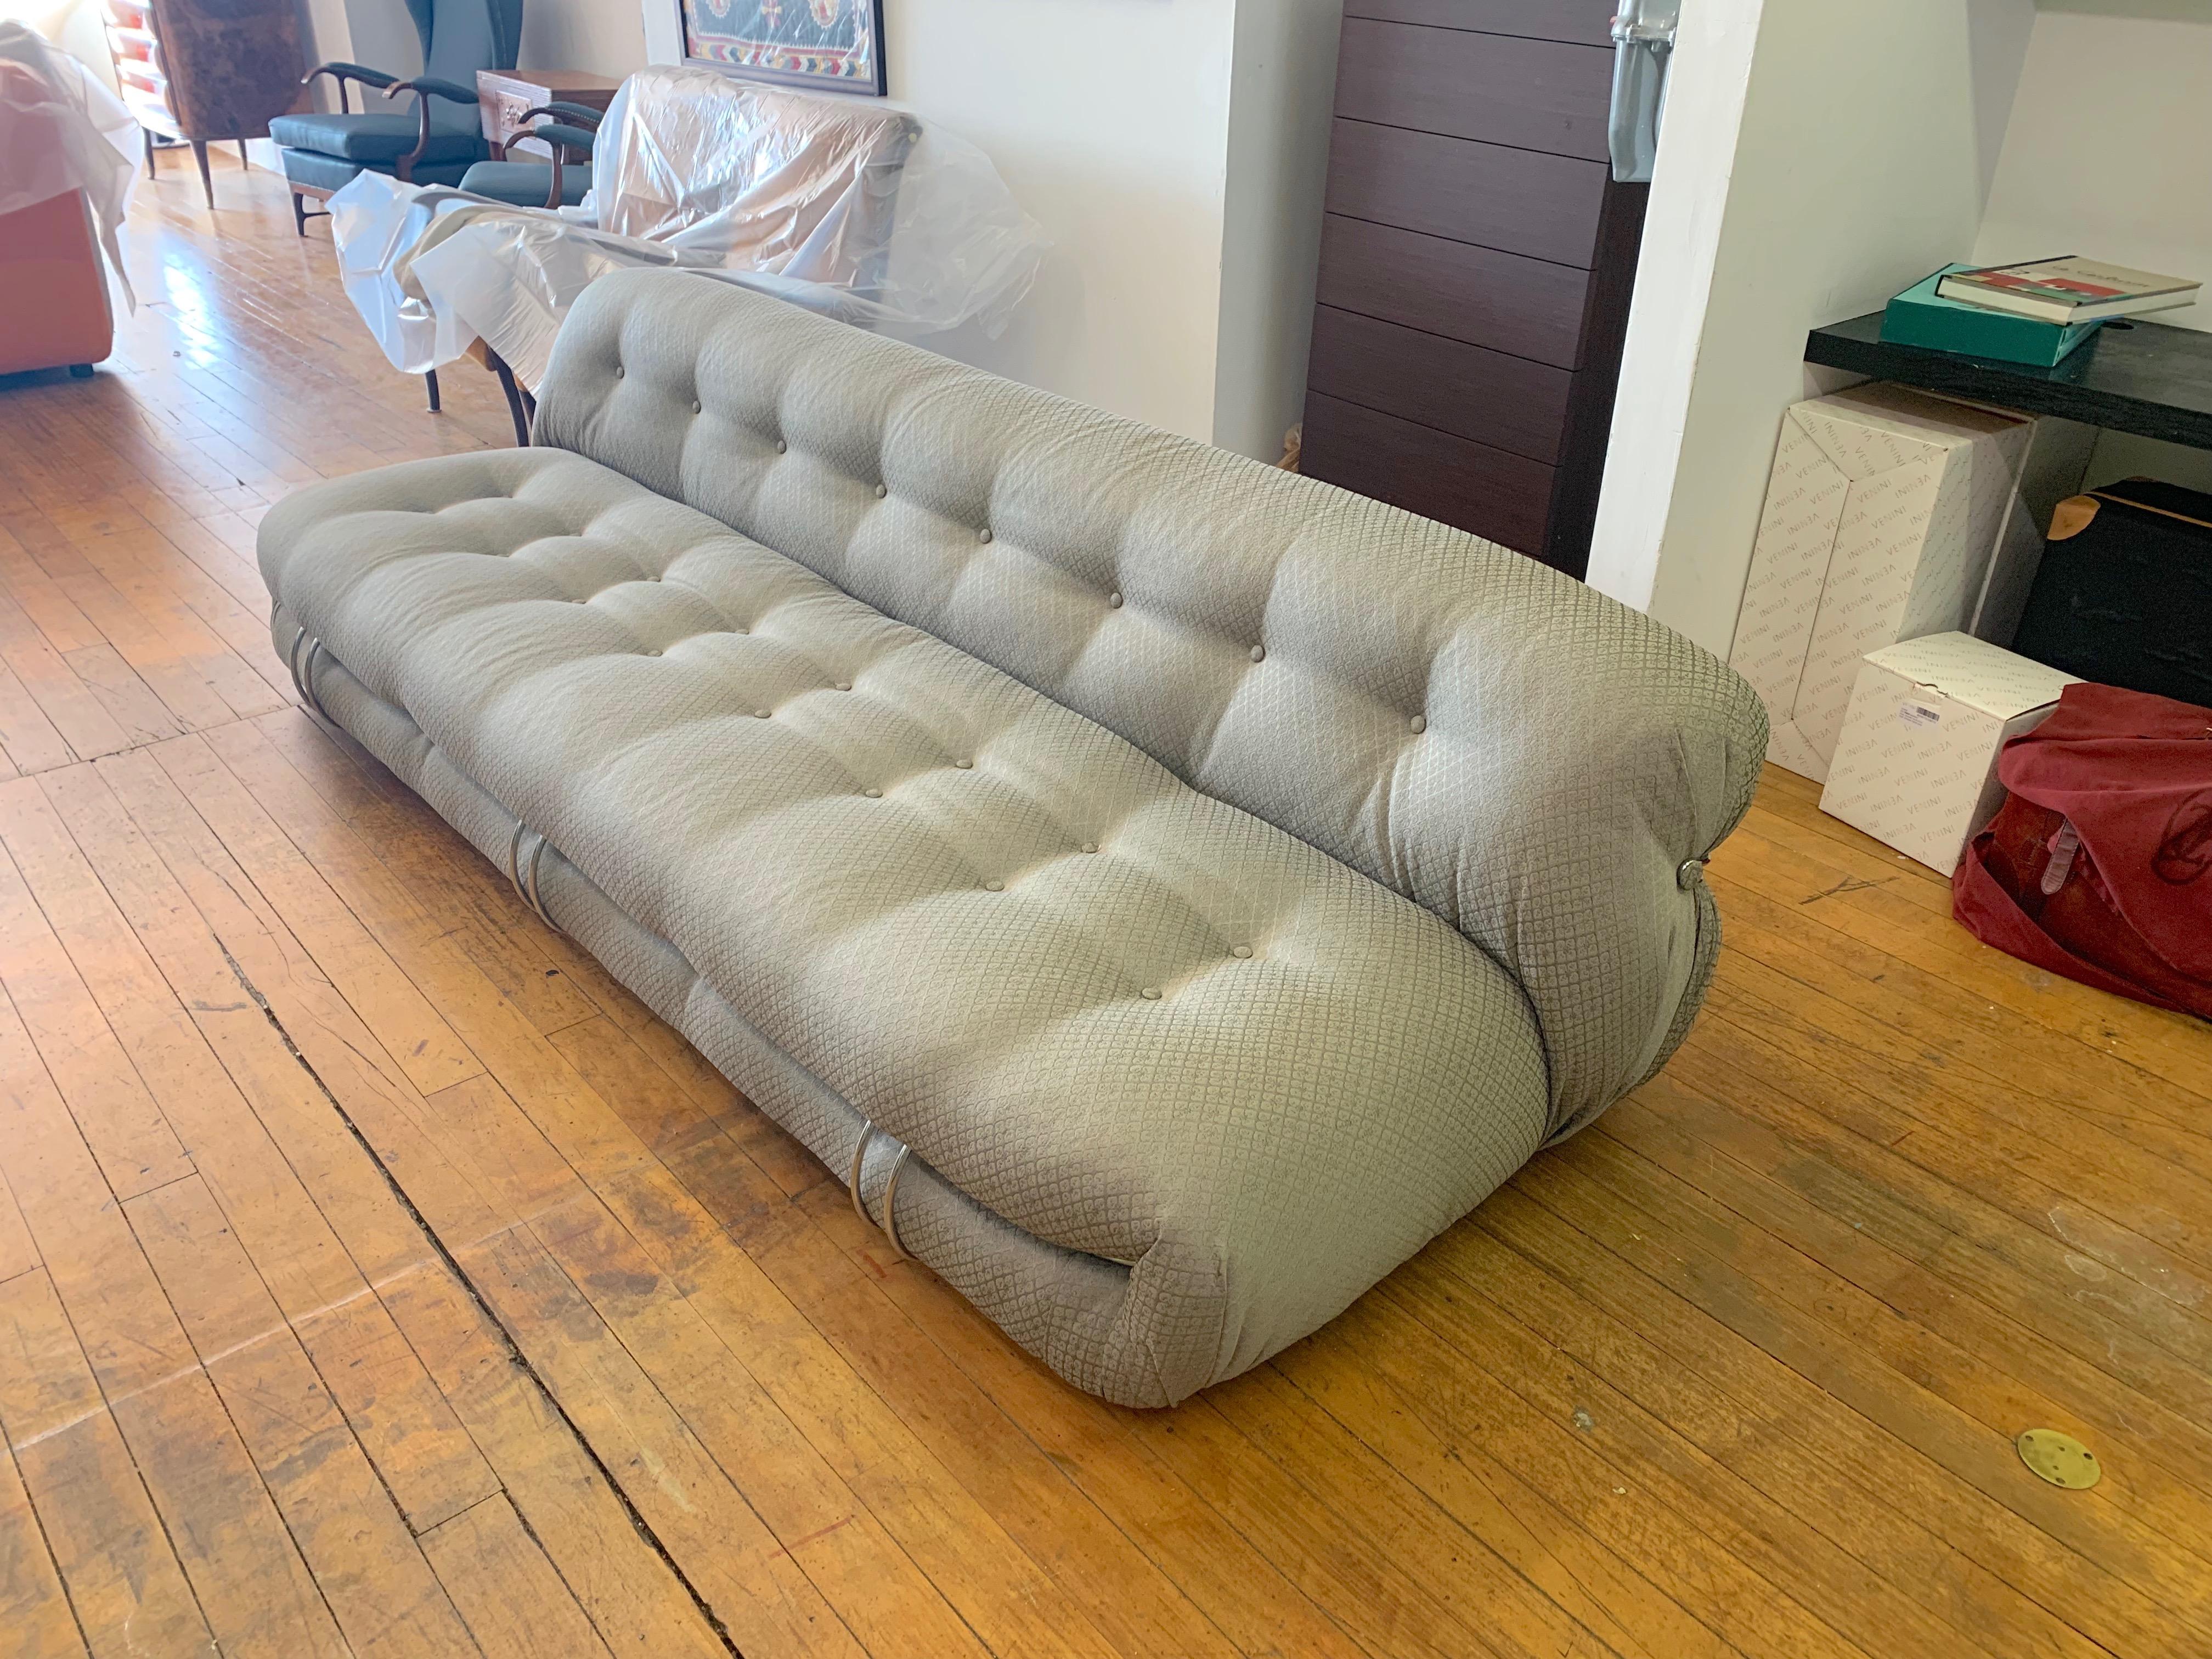 Soriana sofa design Tobia Scarpa for Cassina 1976, licensed by Cassina for Atelier International, fabric upholstery good condition consistent with age and use. Large Sofa version with three front metal clamps. Matching medium size sofa available in